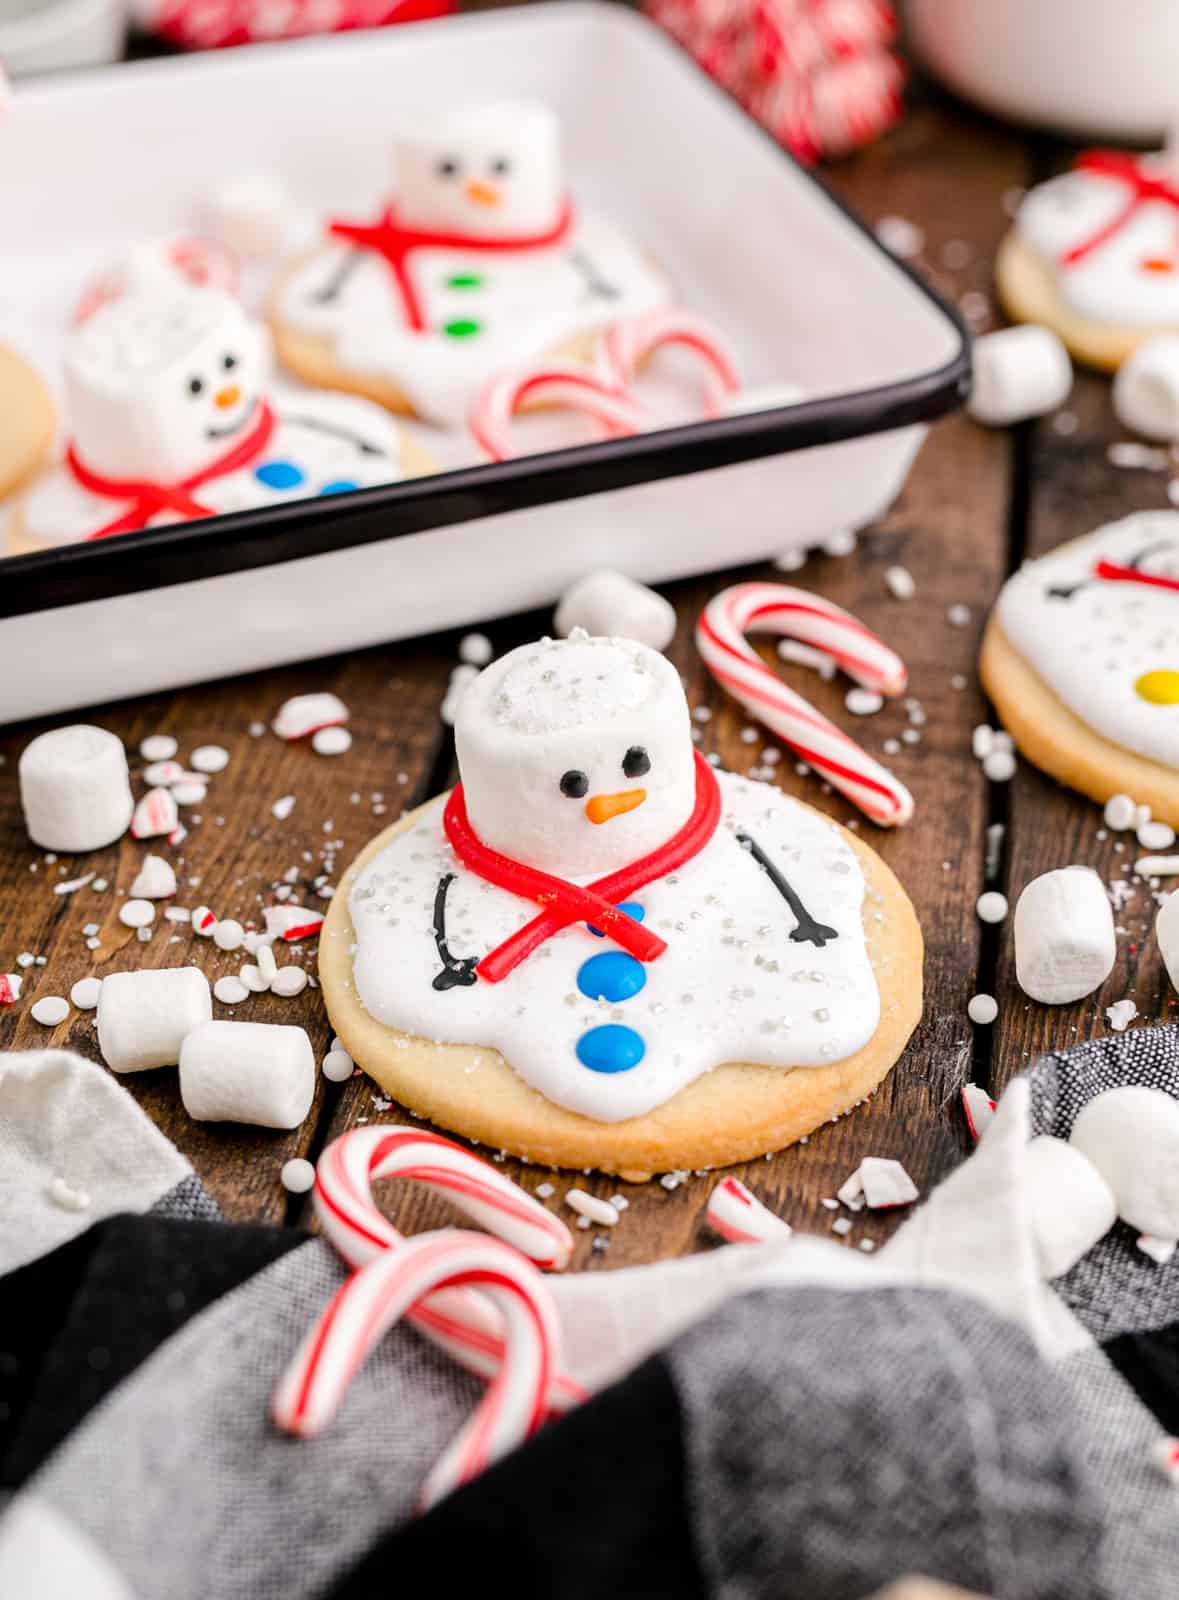 Melted Snowman Cookie with a tray of cookies in back.